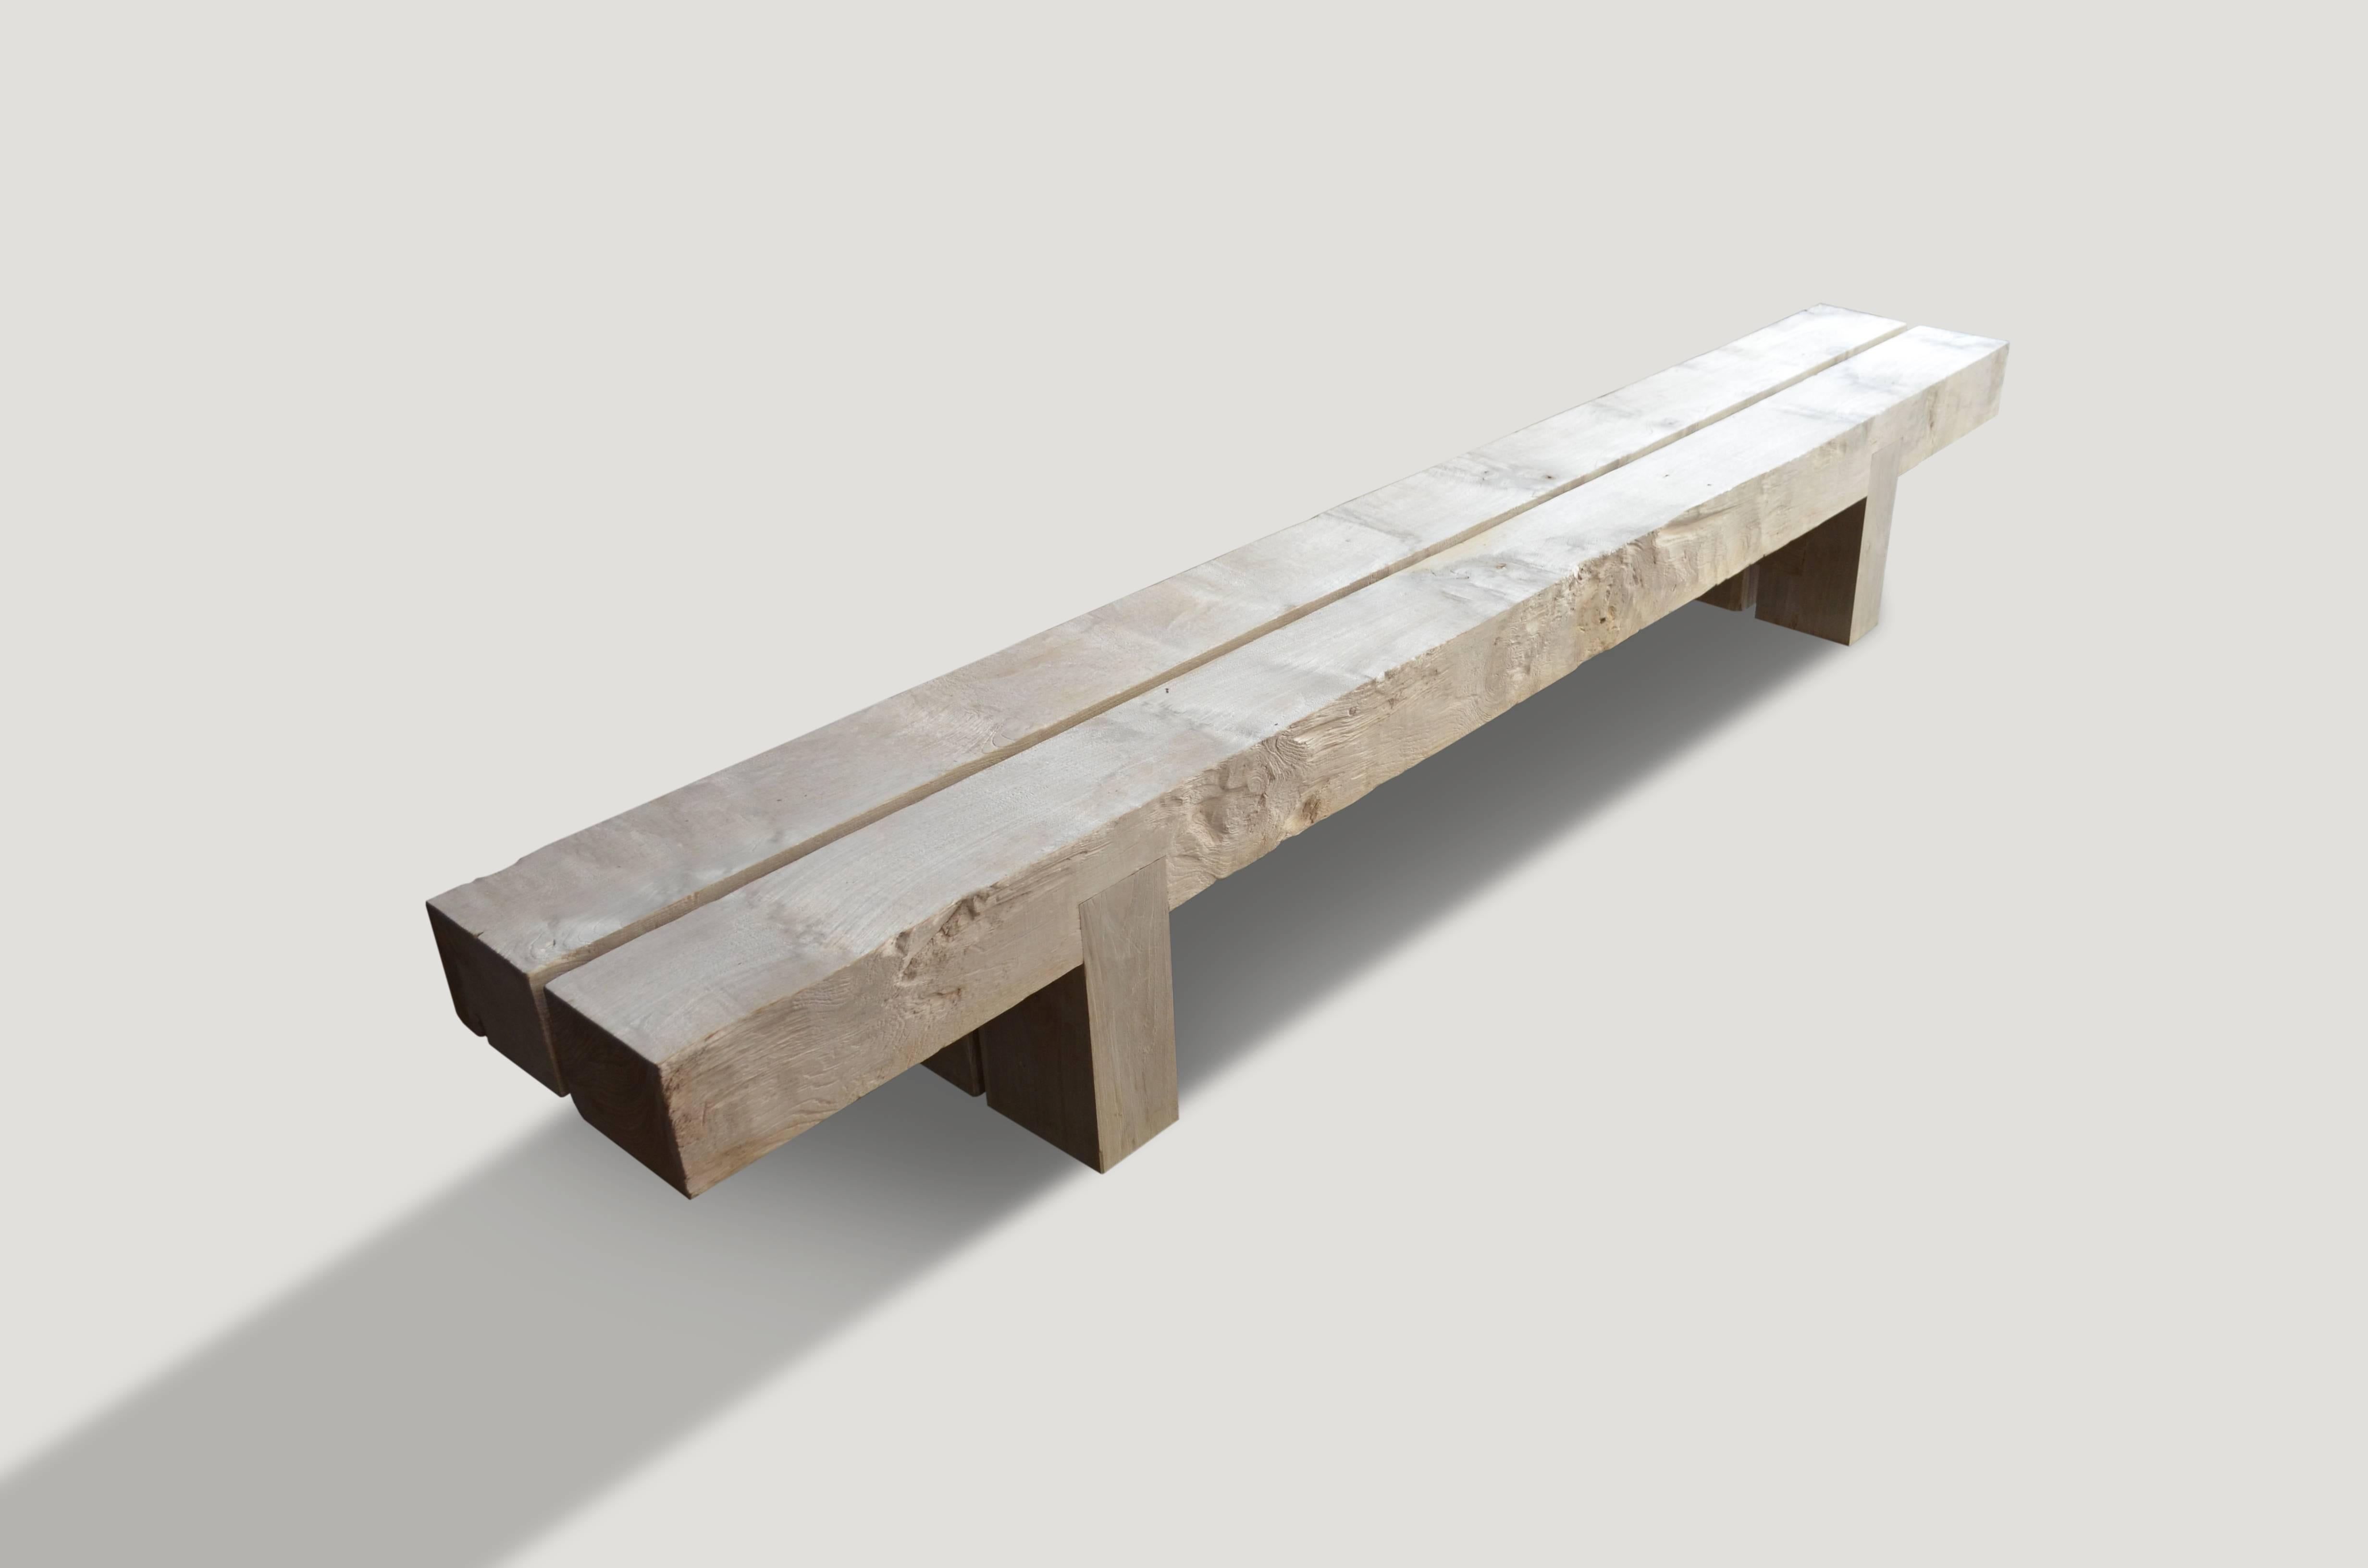 Impressive reclaimed bleached teak wood log bench. Perfect for inside or outside living. The two top pieces rest on a modern teak base.

The St. Barts collection features an exciting new line of organic white wash and natural weathered teak